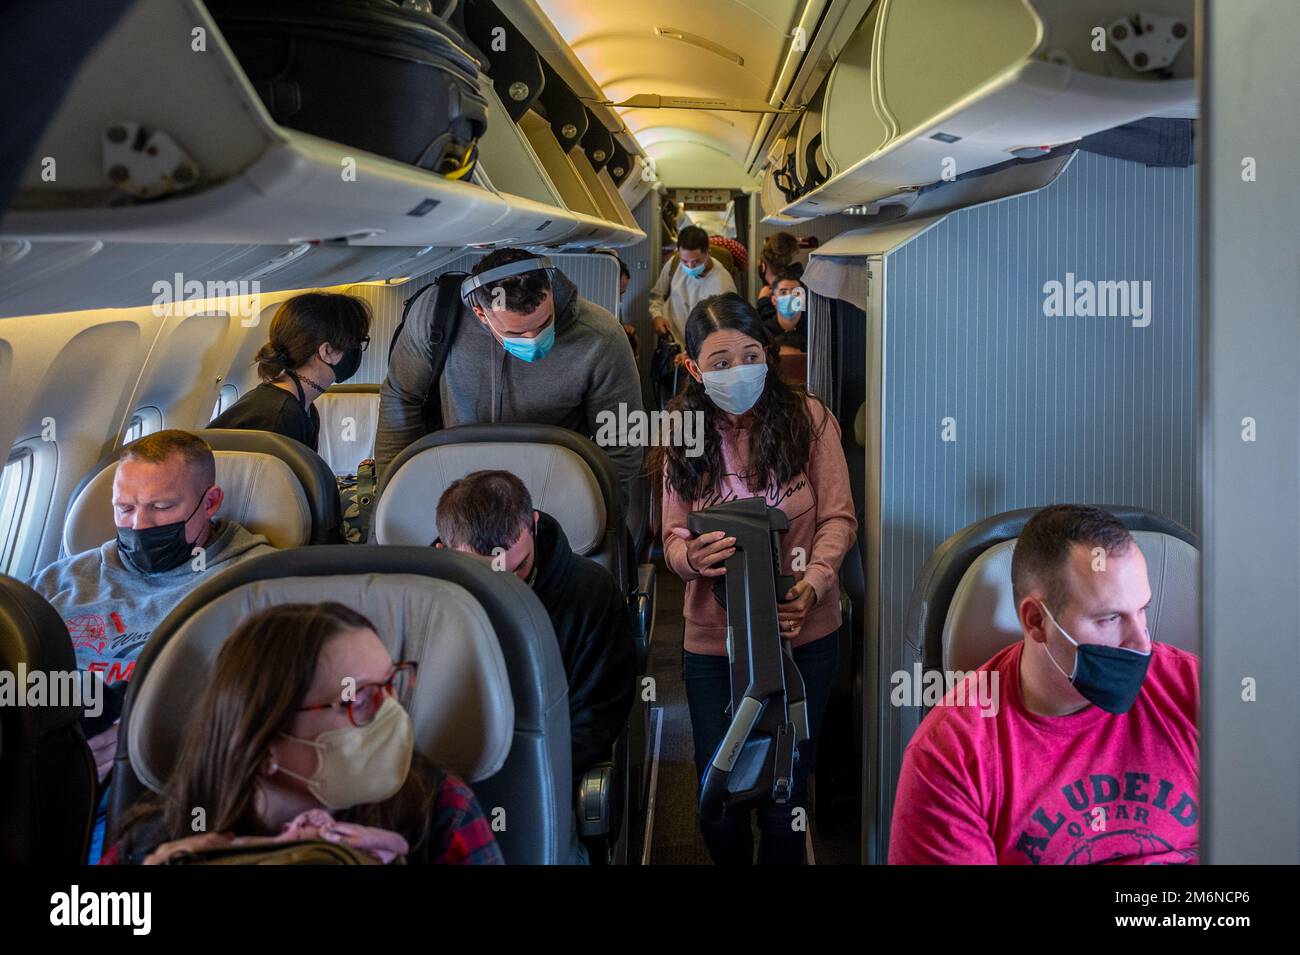 Passengers prepare to exit the aircraft after landing at Osan Air Base, Republic of Korea, May 2, 2022. Mask-wear is still mandatory in all DoD transportation assets, regardless of vaccination status. Stock Photo